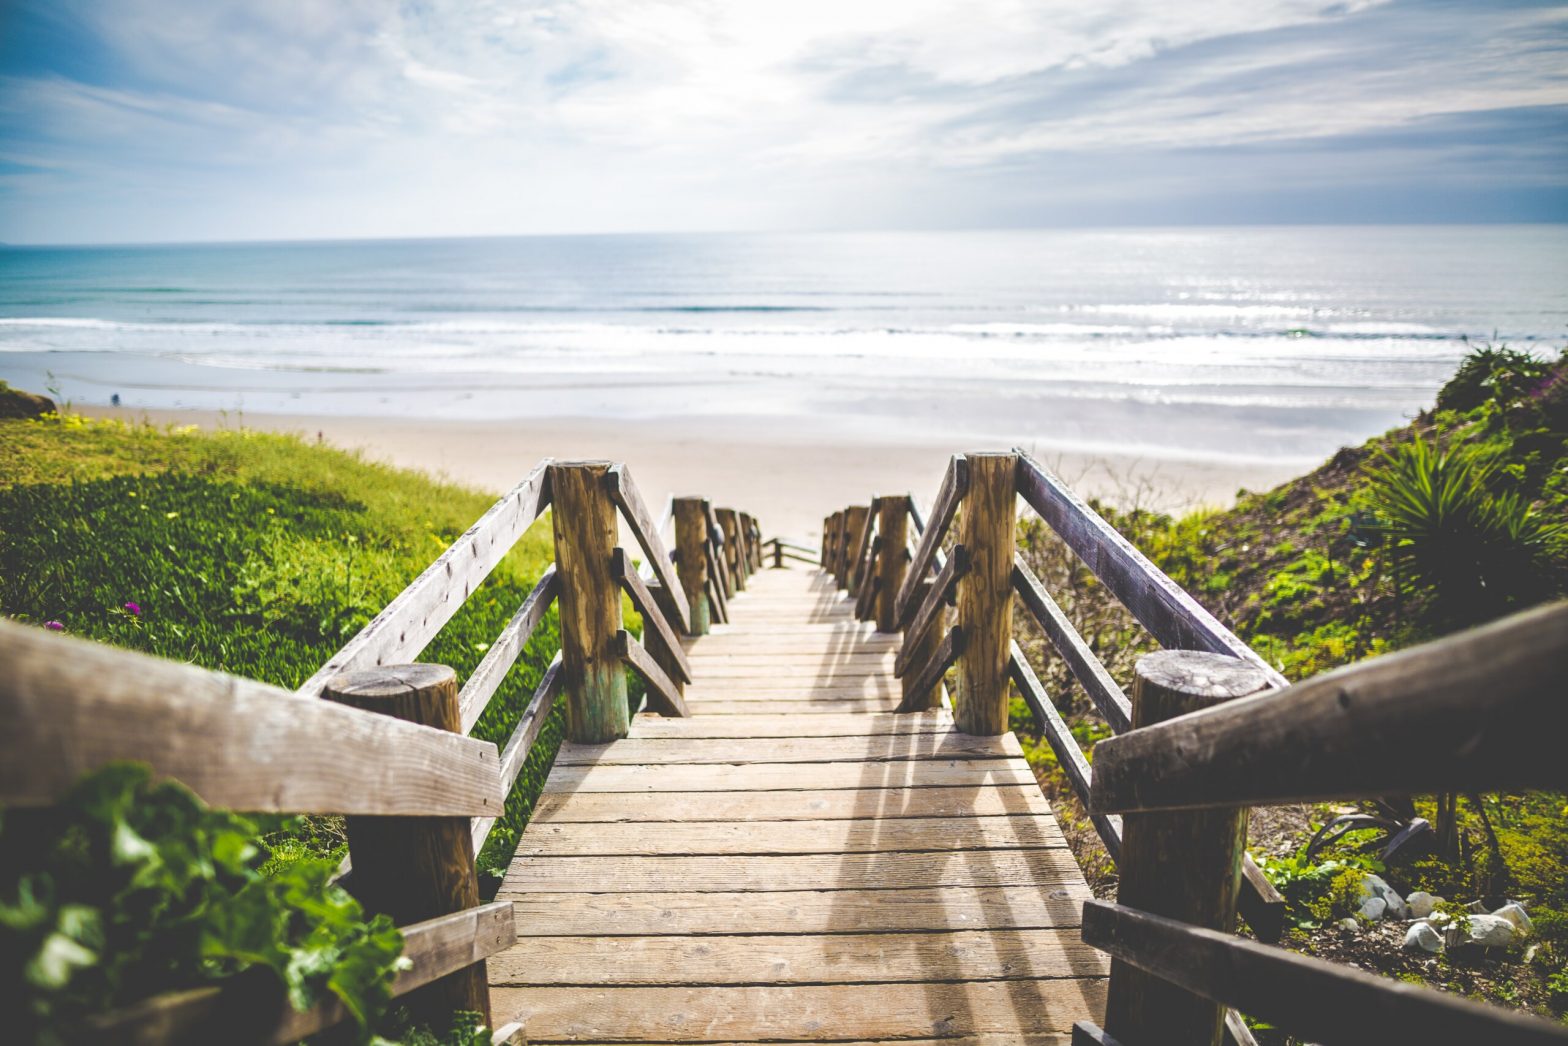 Wooden steps leading to beach